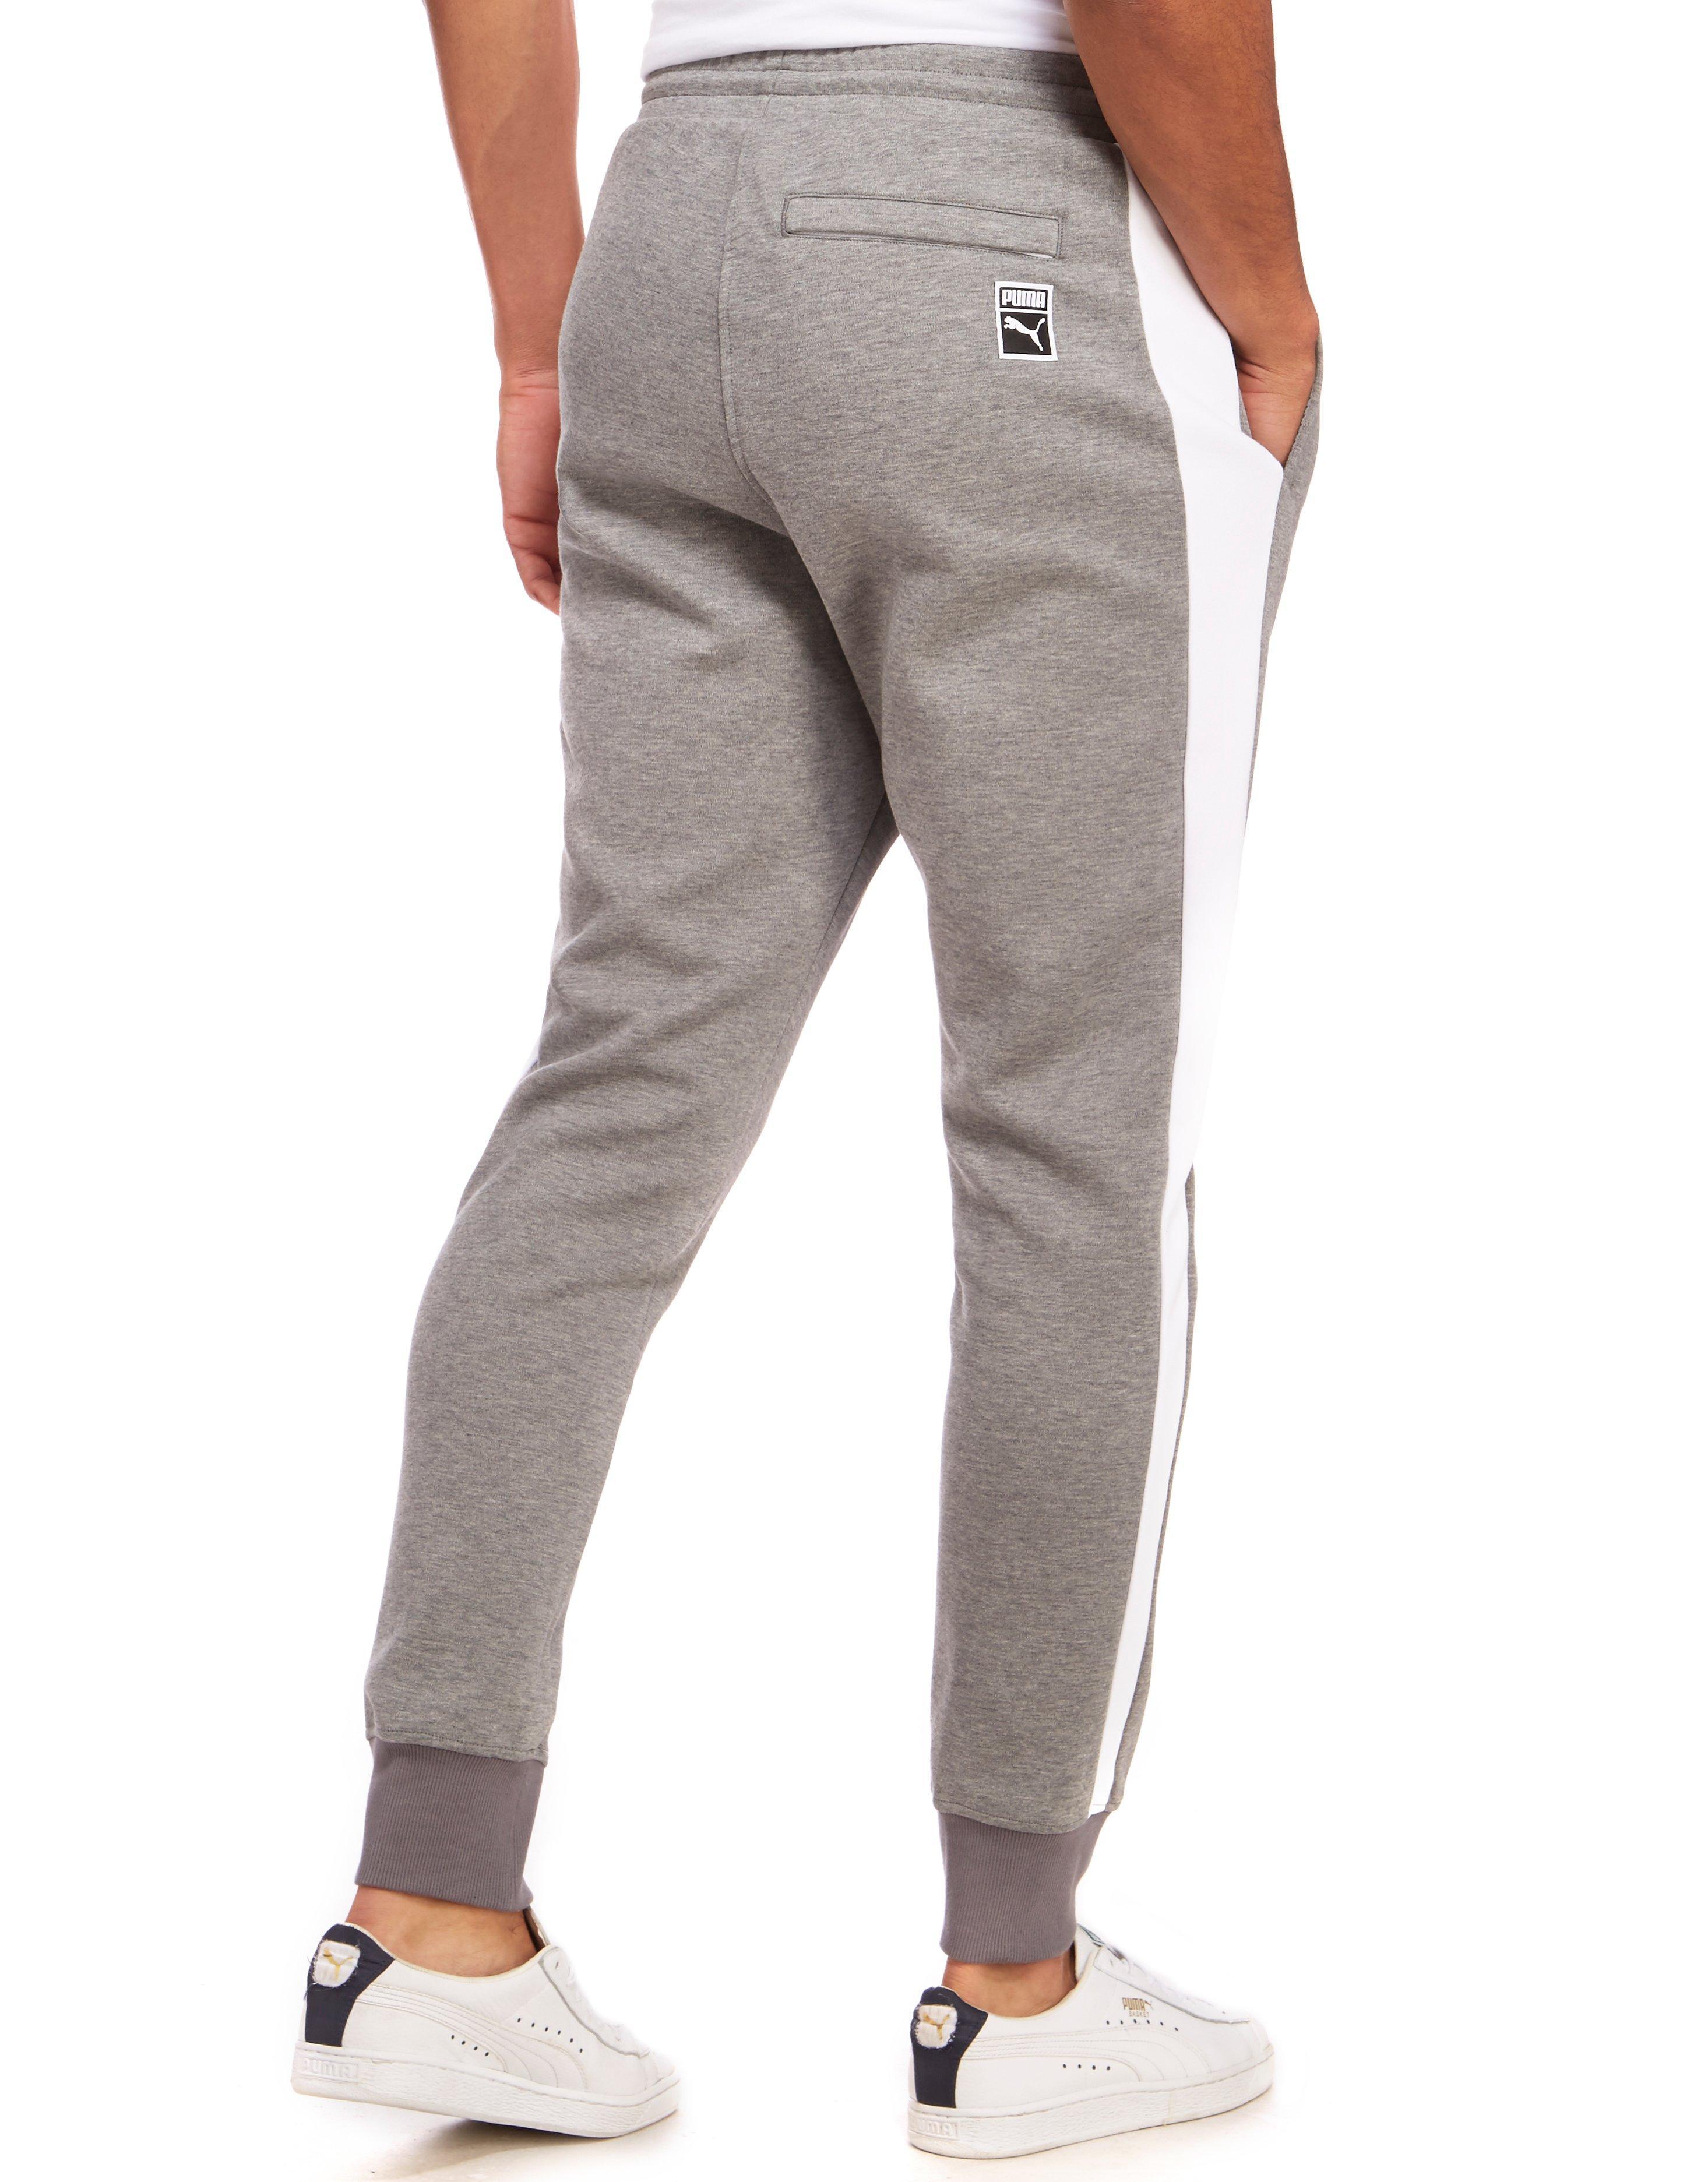 Lyst - Puma Archive Track Pants in Gray for Men